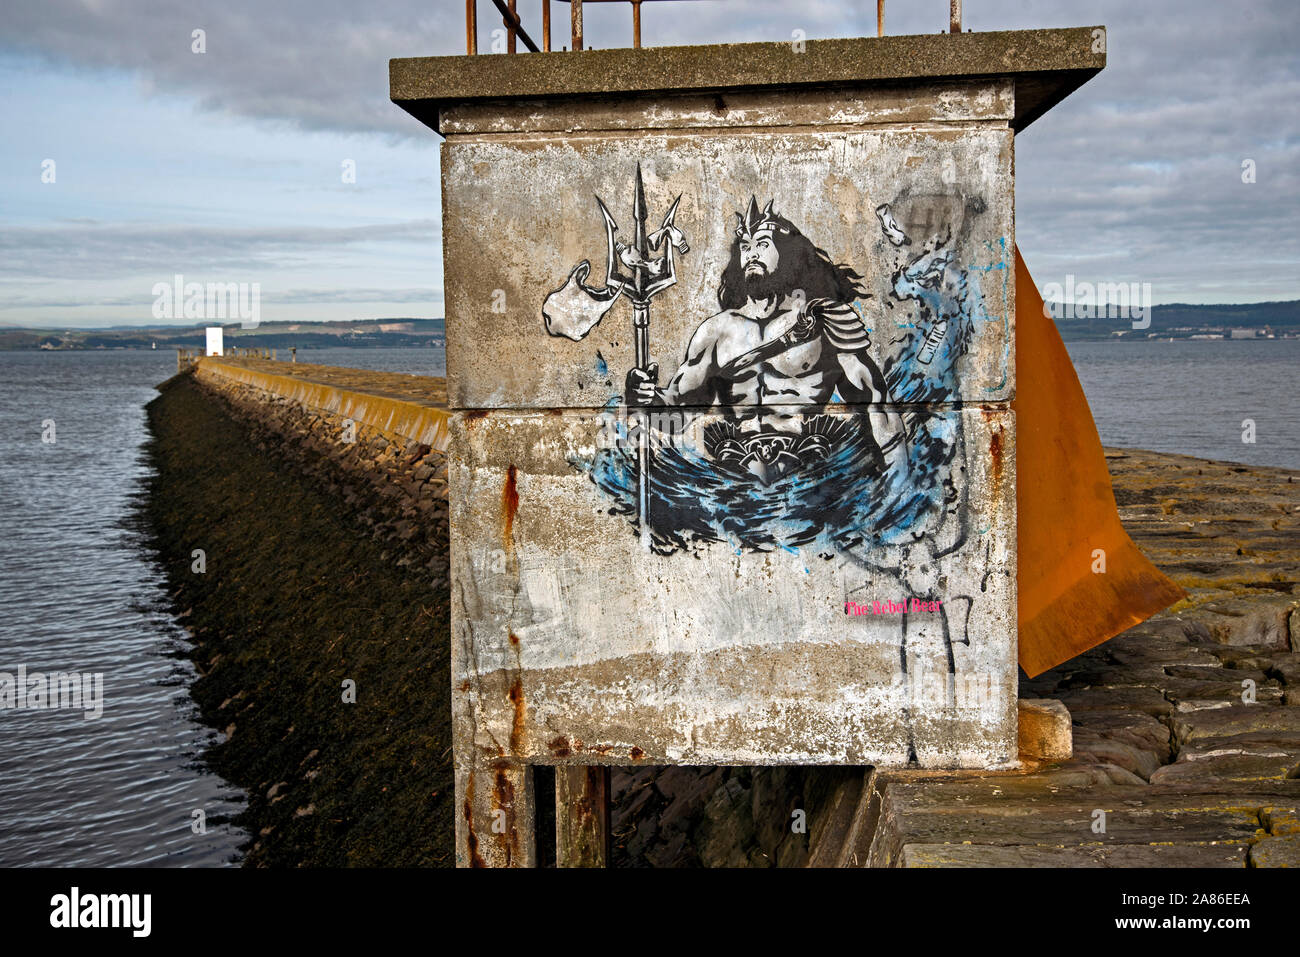 Stencil graffiti showing Neptune with plastic bags caught on his trident, on the breakwater at Granton Harbour, Edinburgh, Scotland, UK. Stock Photo